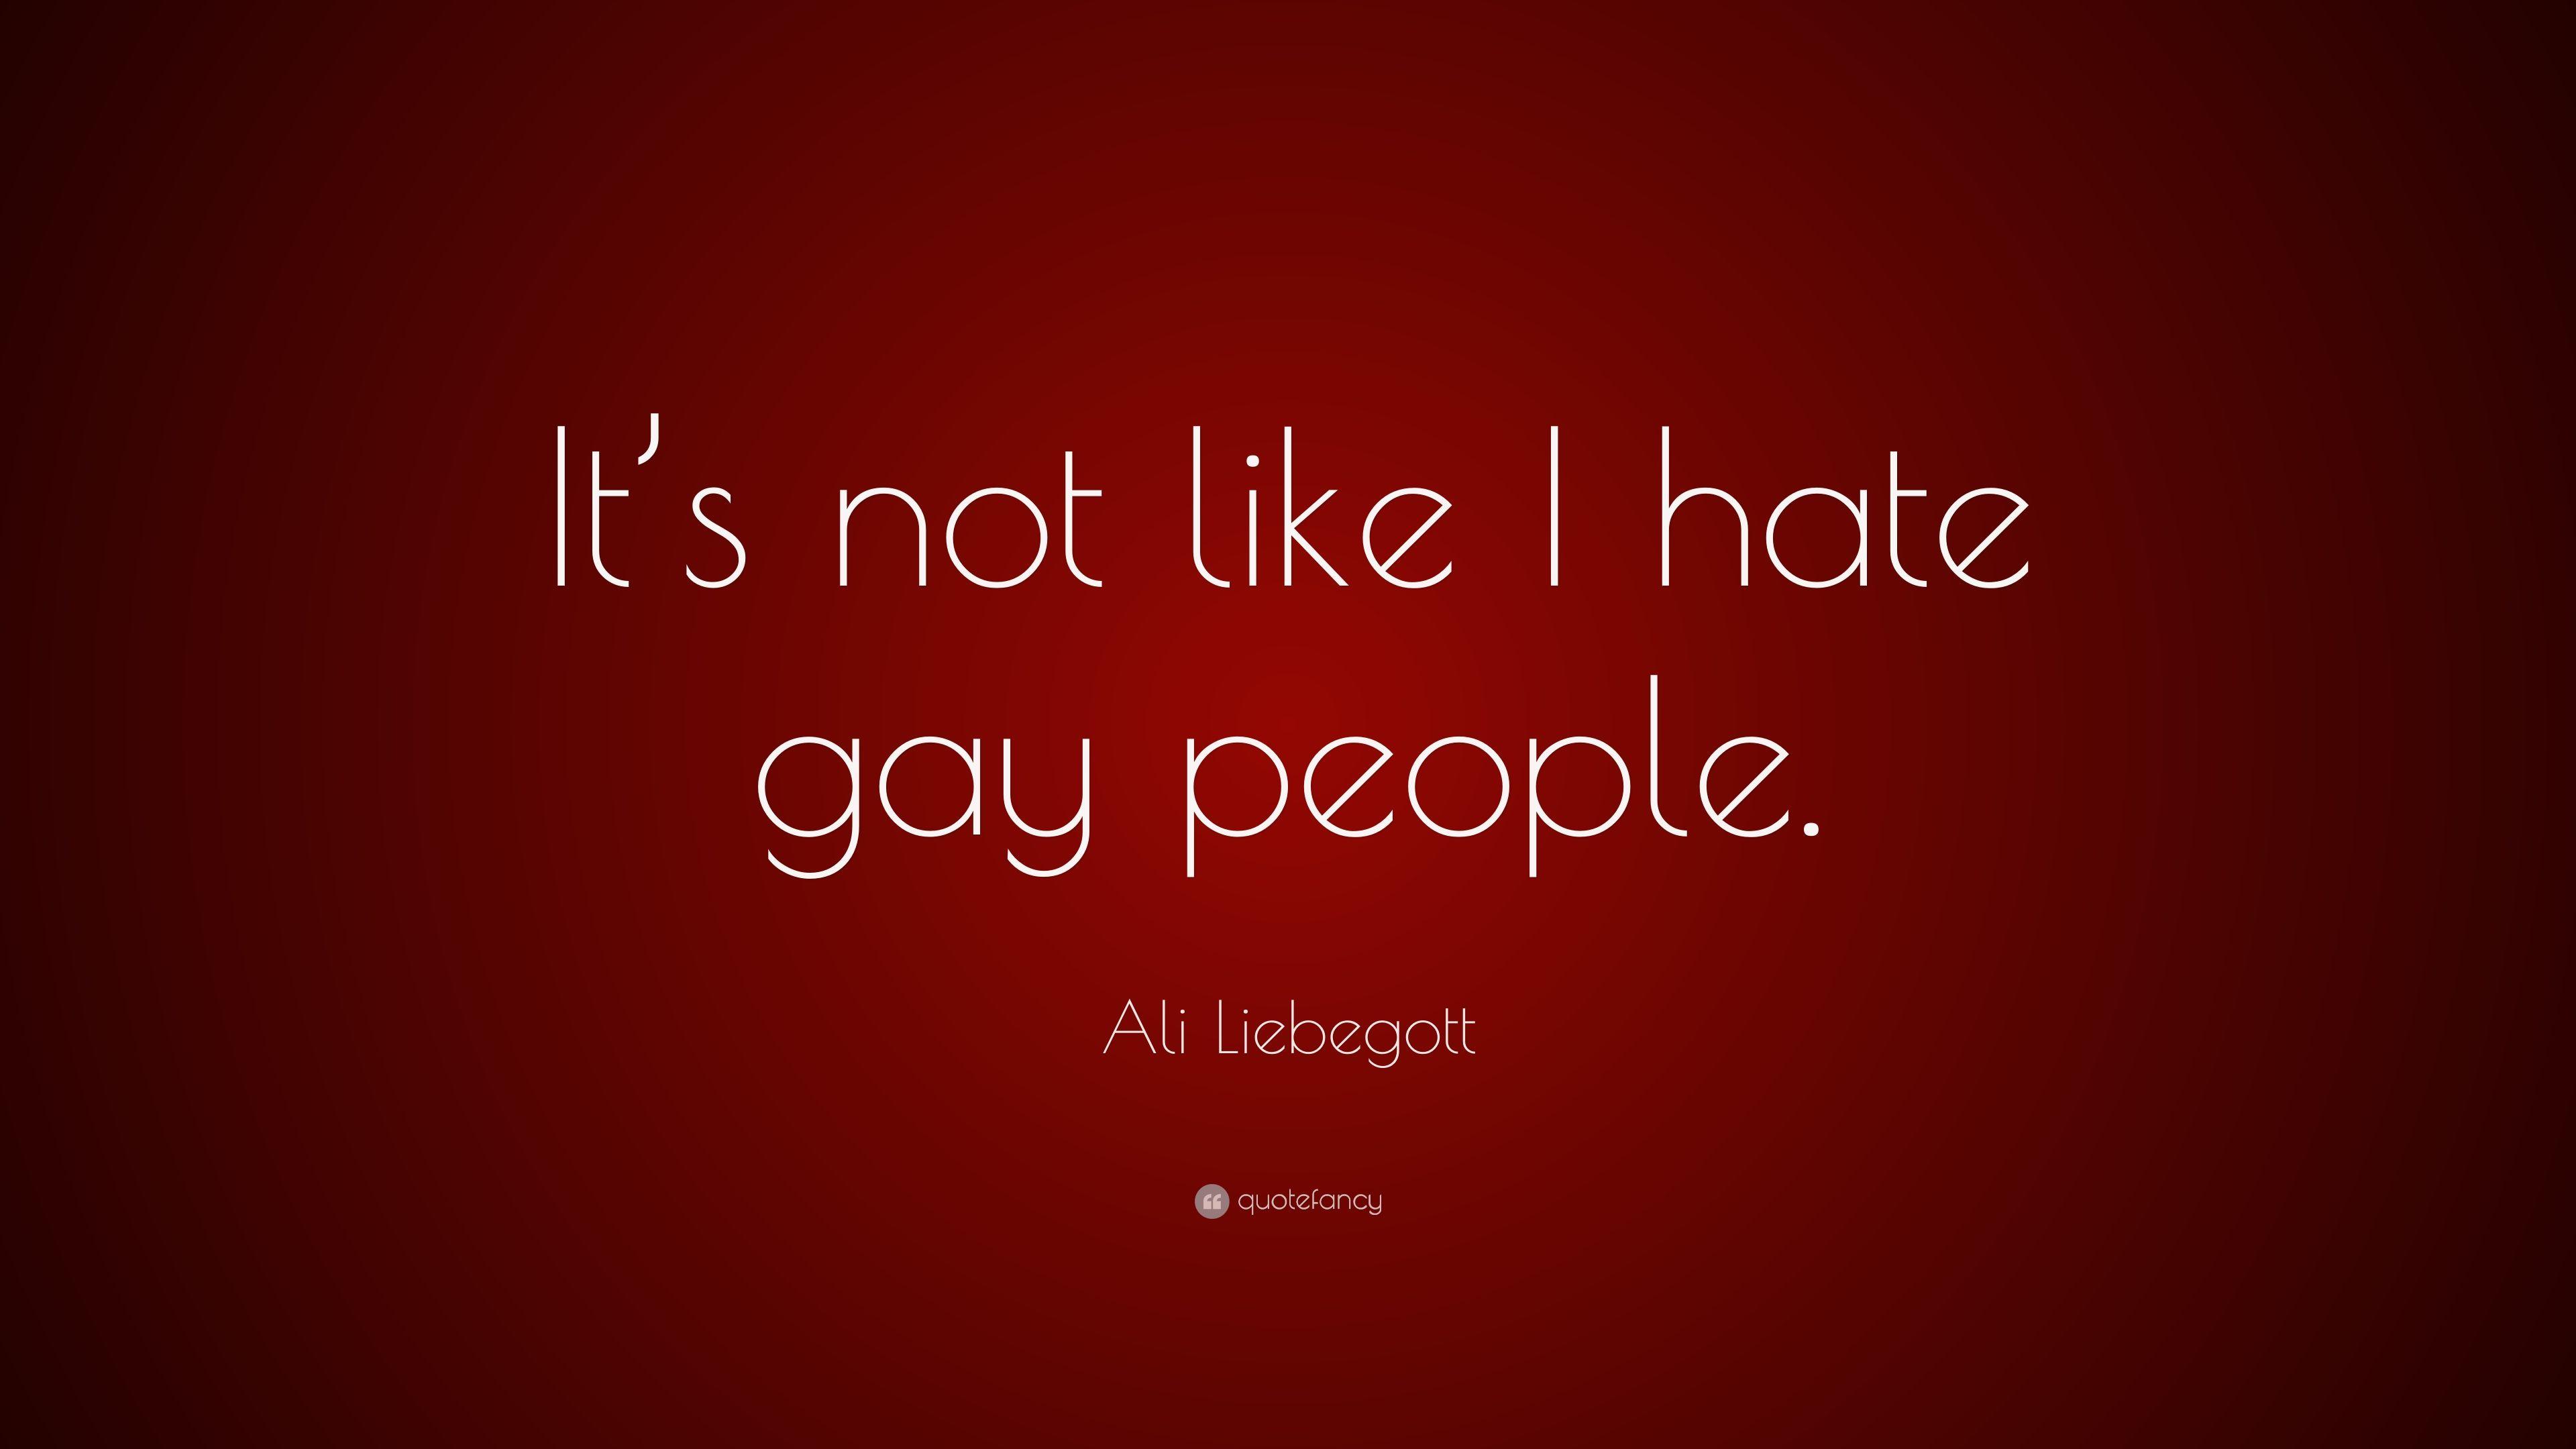 Ali Liebegott Quote: “It's not like I hate gay people.” 7